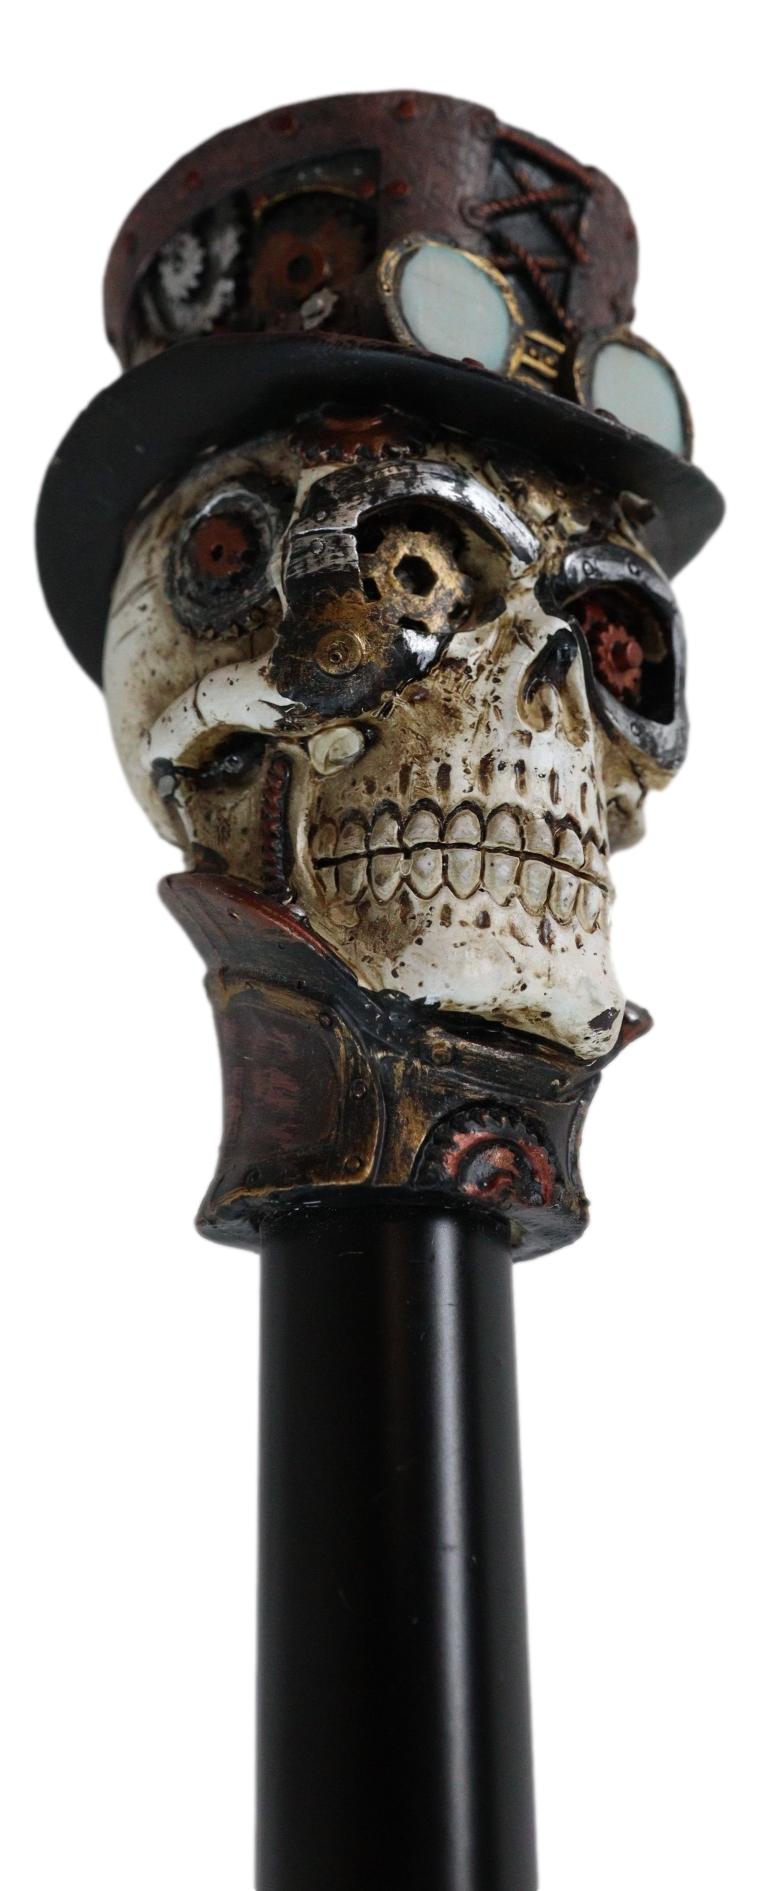 Geared Steampunk Skull Cyborg With Top Hat Decorative Prop Cosplay Swagger Cane